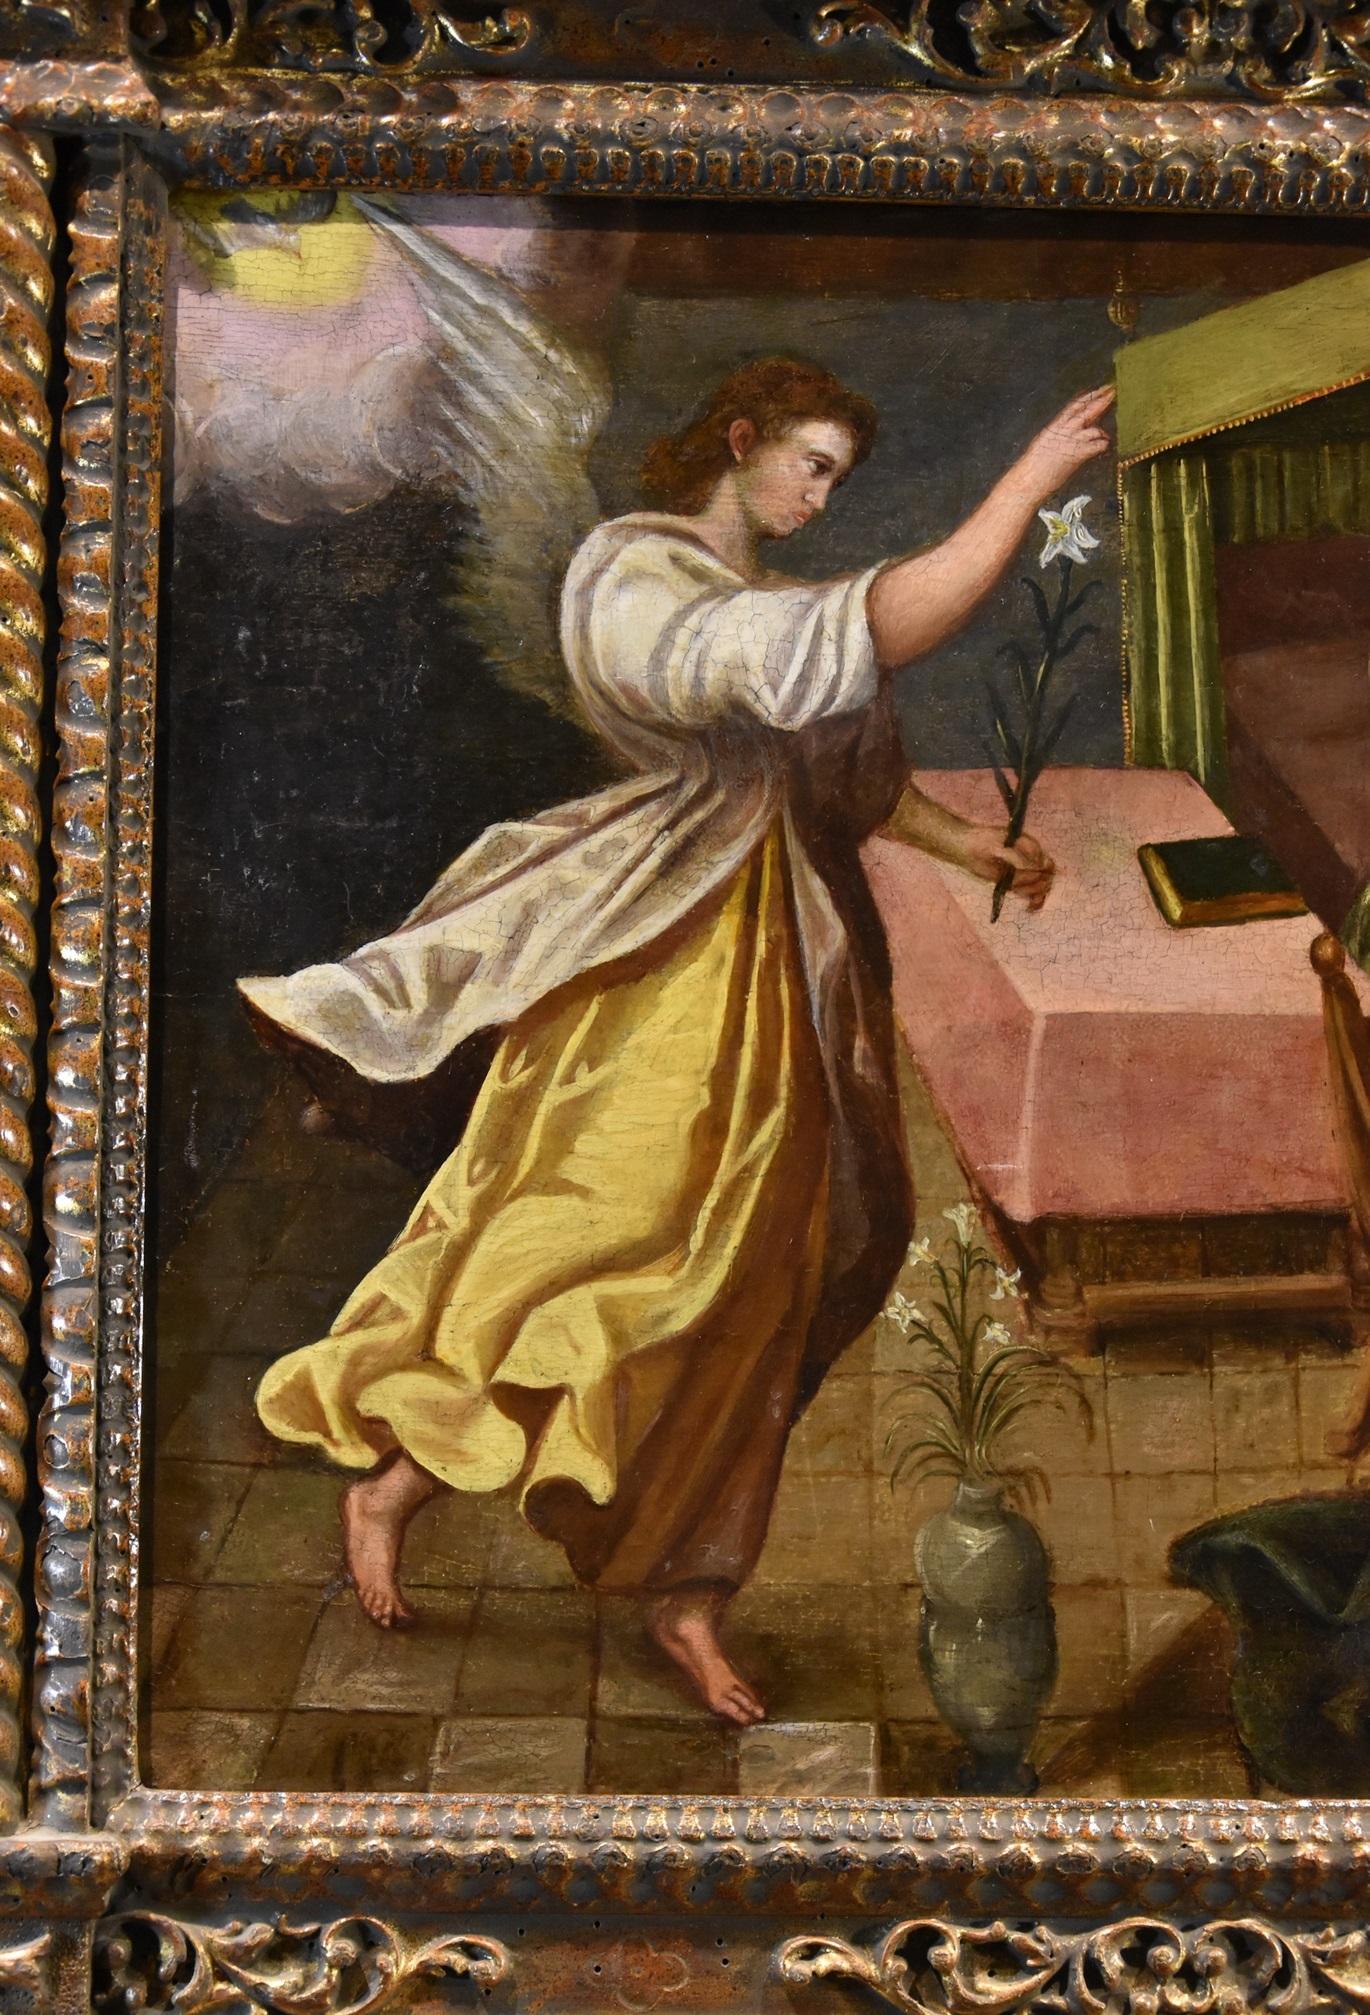 Tuscan School, second half of the 16th century
The Annunciation

Oil on canvas

51 x 65 cm.
In tabernacle frame 77 x 91 cm.

We offer this refined Annunciation, to be attributed to the hand of a painter active in the Tuscan area, of the Florentine